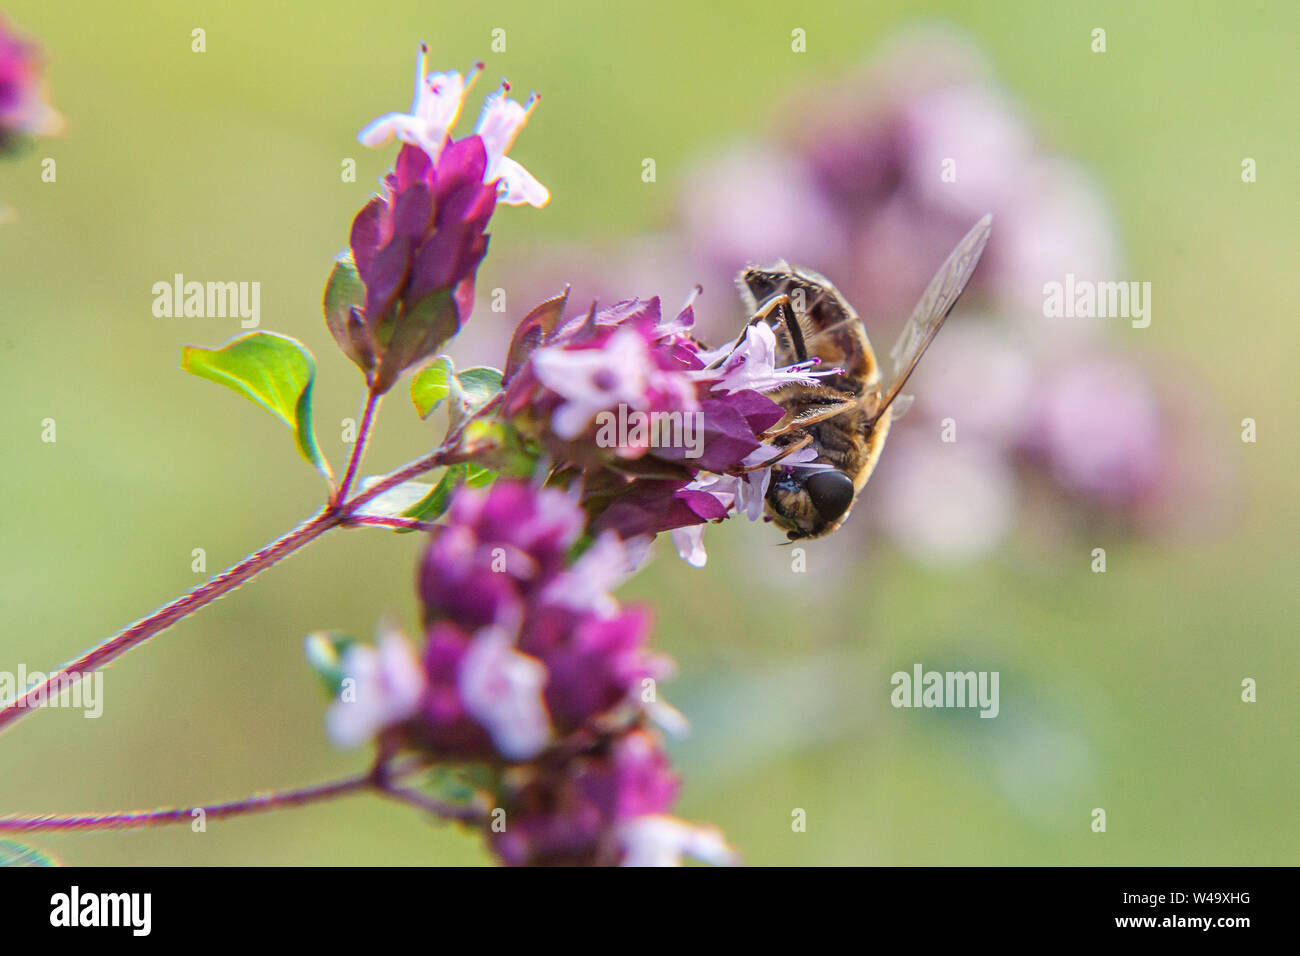 Honey bee covered with yellow pollen drink nectar, pollinating pink flower. Inspirational natural floral spring or summer blooming garden or park back Stock Photo